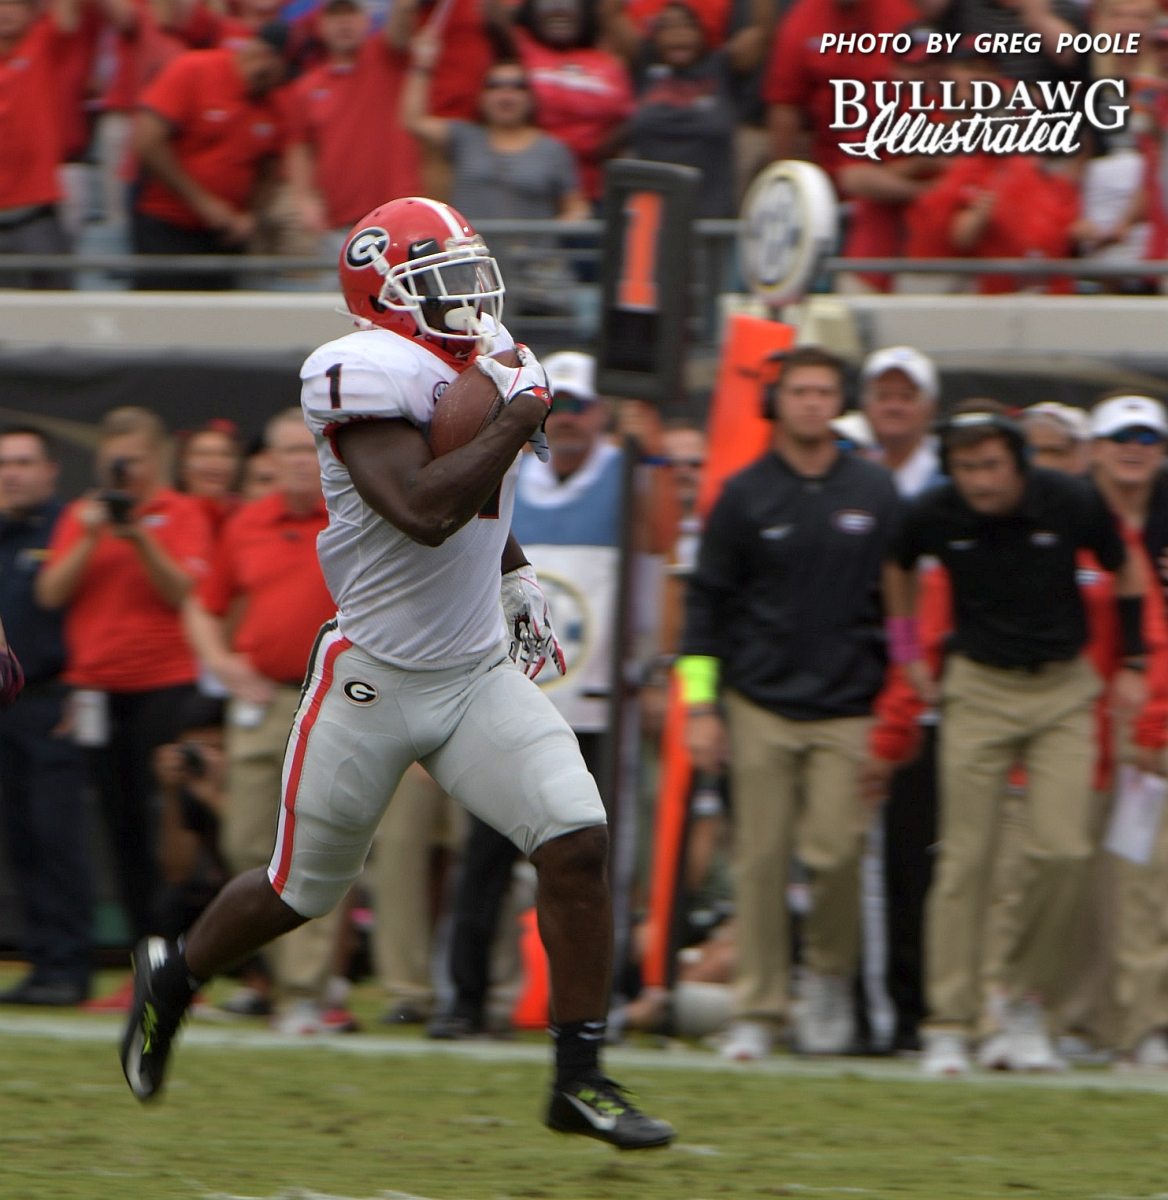 Sony Michel (1) rumbles down the field for a 74-yard touchdown run during the first quarter of the Georgia-Florida game on Saturday, Oct. 28, 2017.